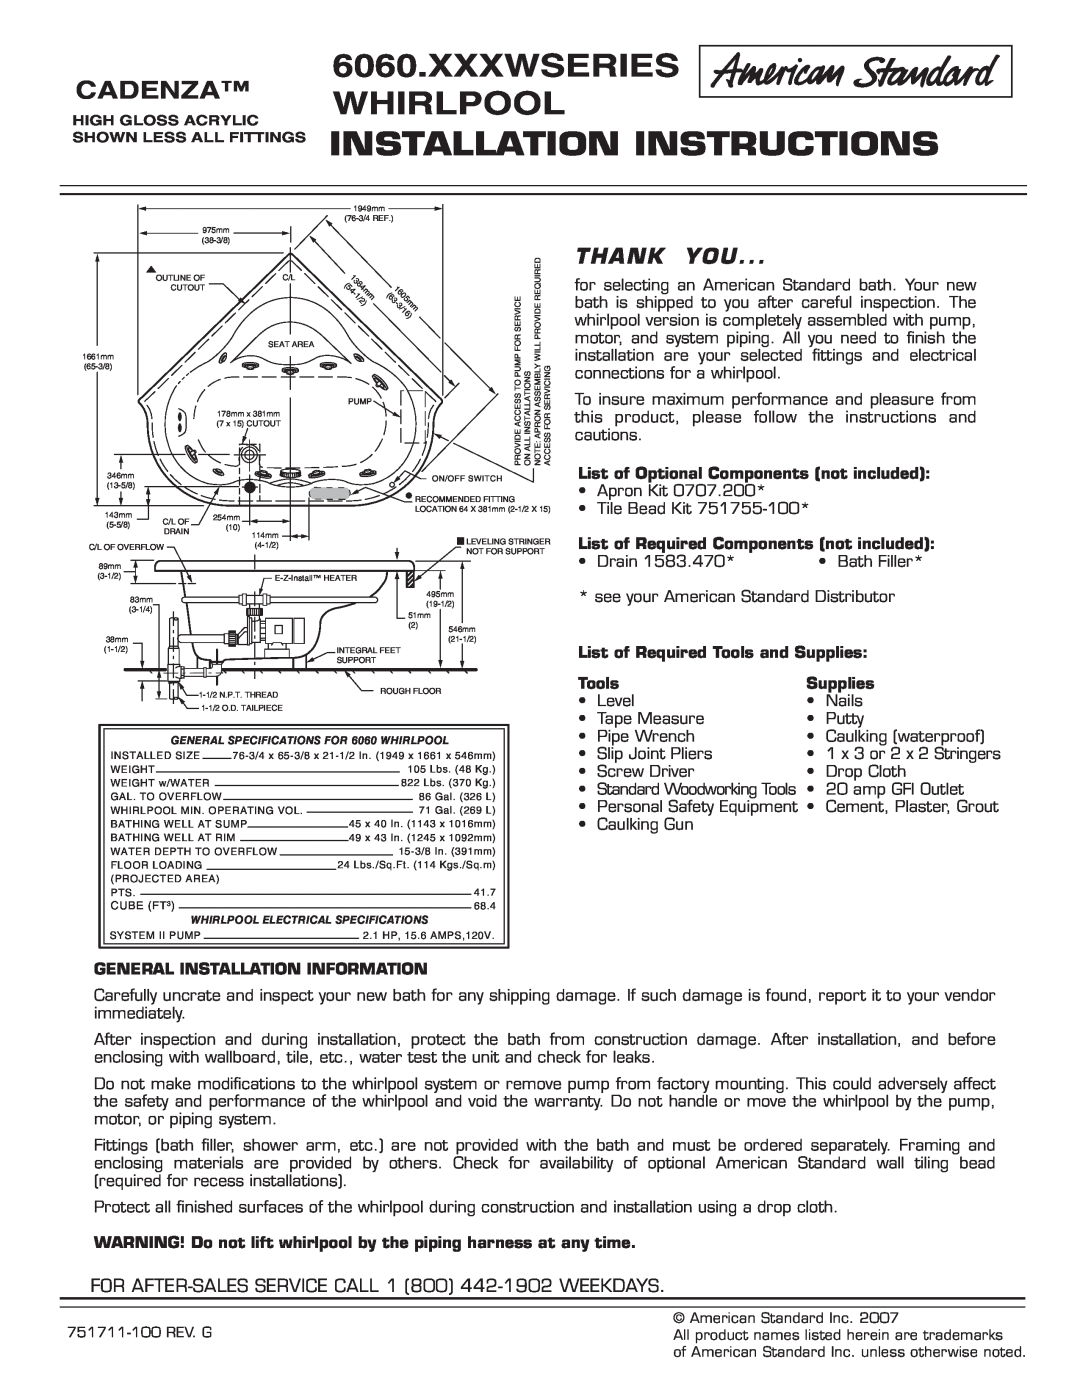 American Standard 751711-100 installation instructions Xxxwseries Whirlpool Installation Instructions, Cadenza, Thank You 